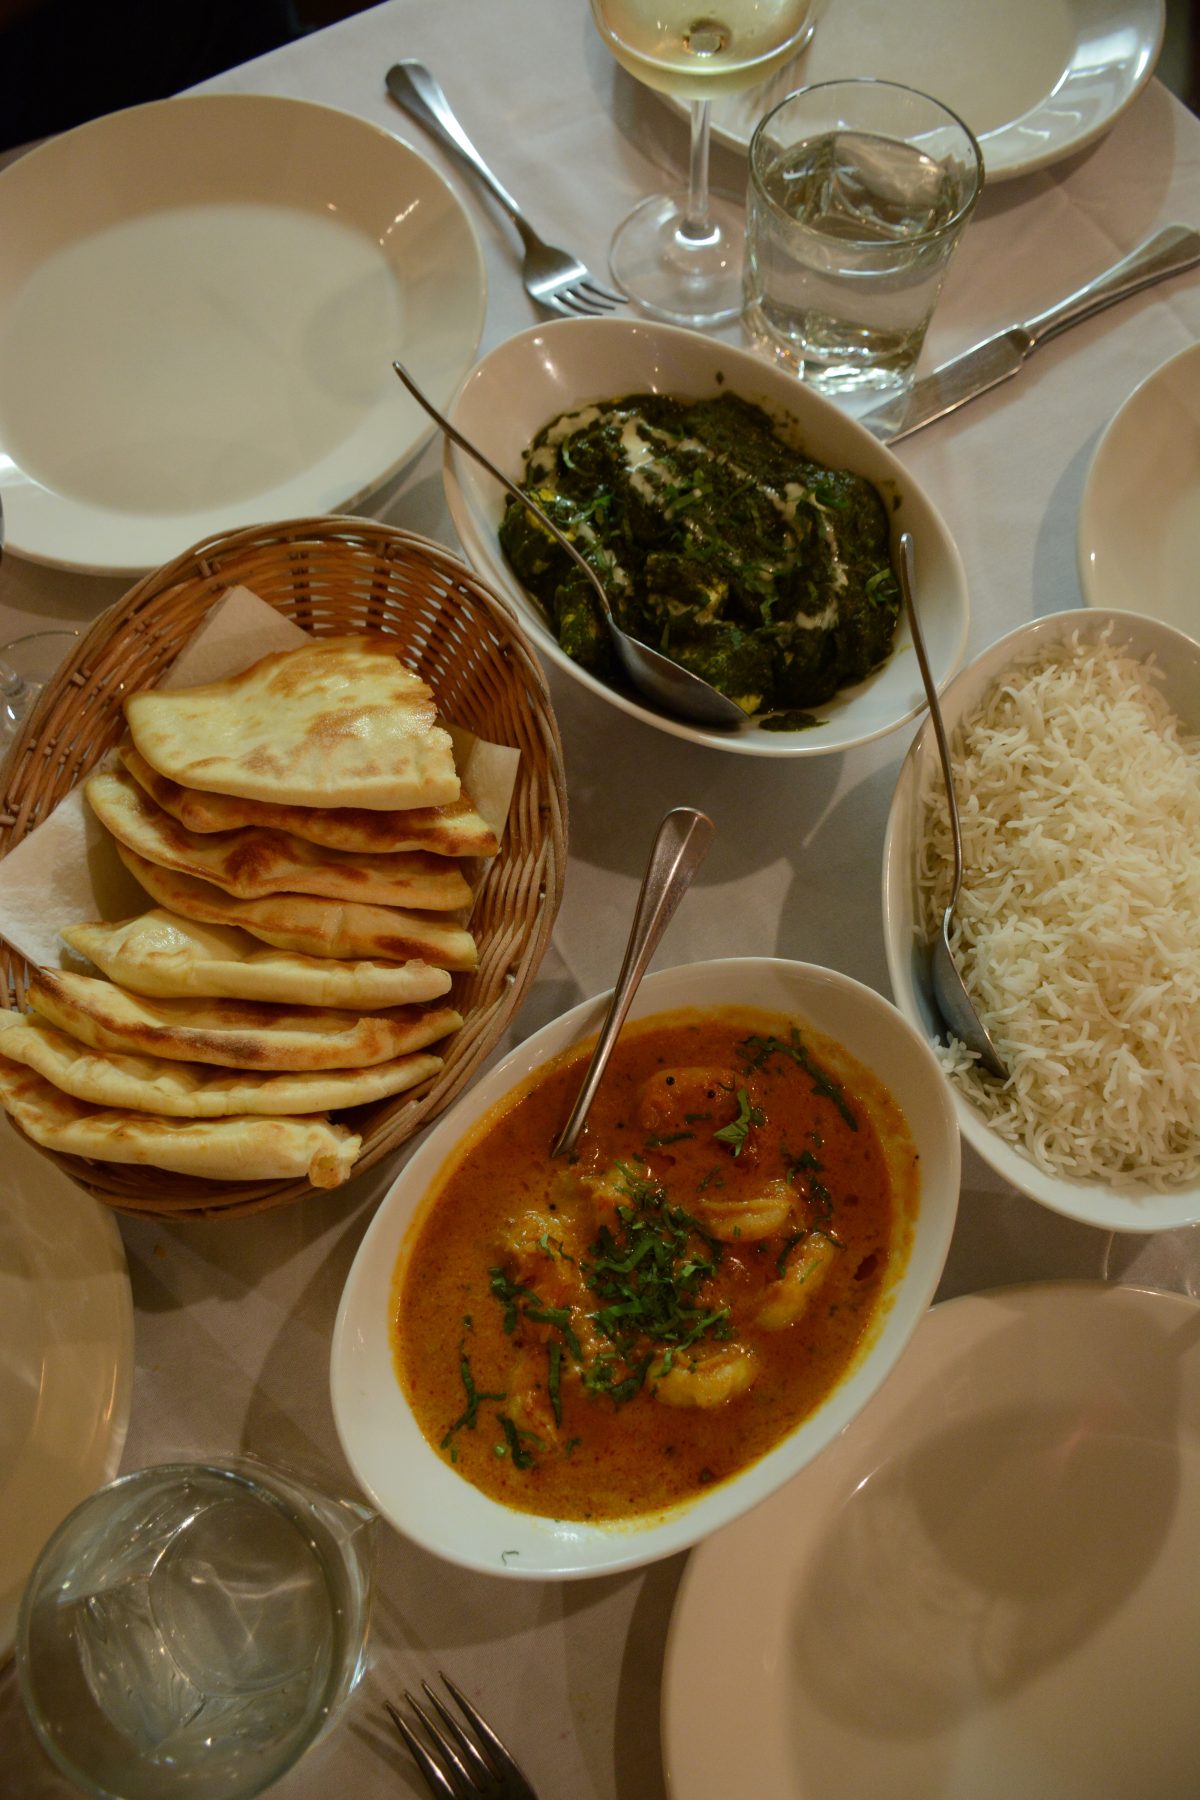 Steamed basmati rice and naan/bread accompanied with Saag Paneer (cottage cheese and spinach curry) and Jheenga Nariyal (King prawns cooked with coconut and spices). 